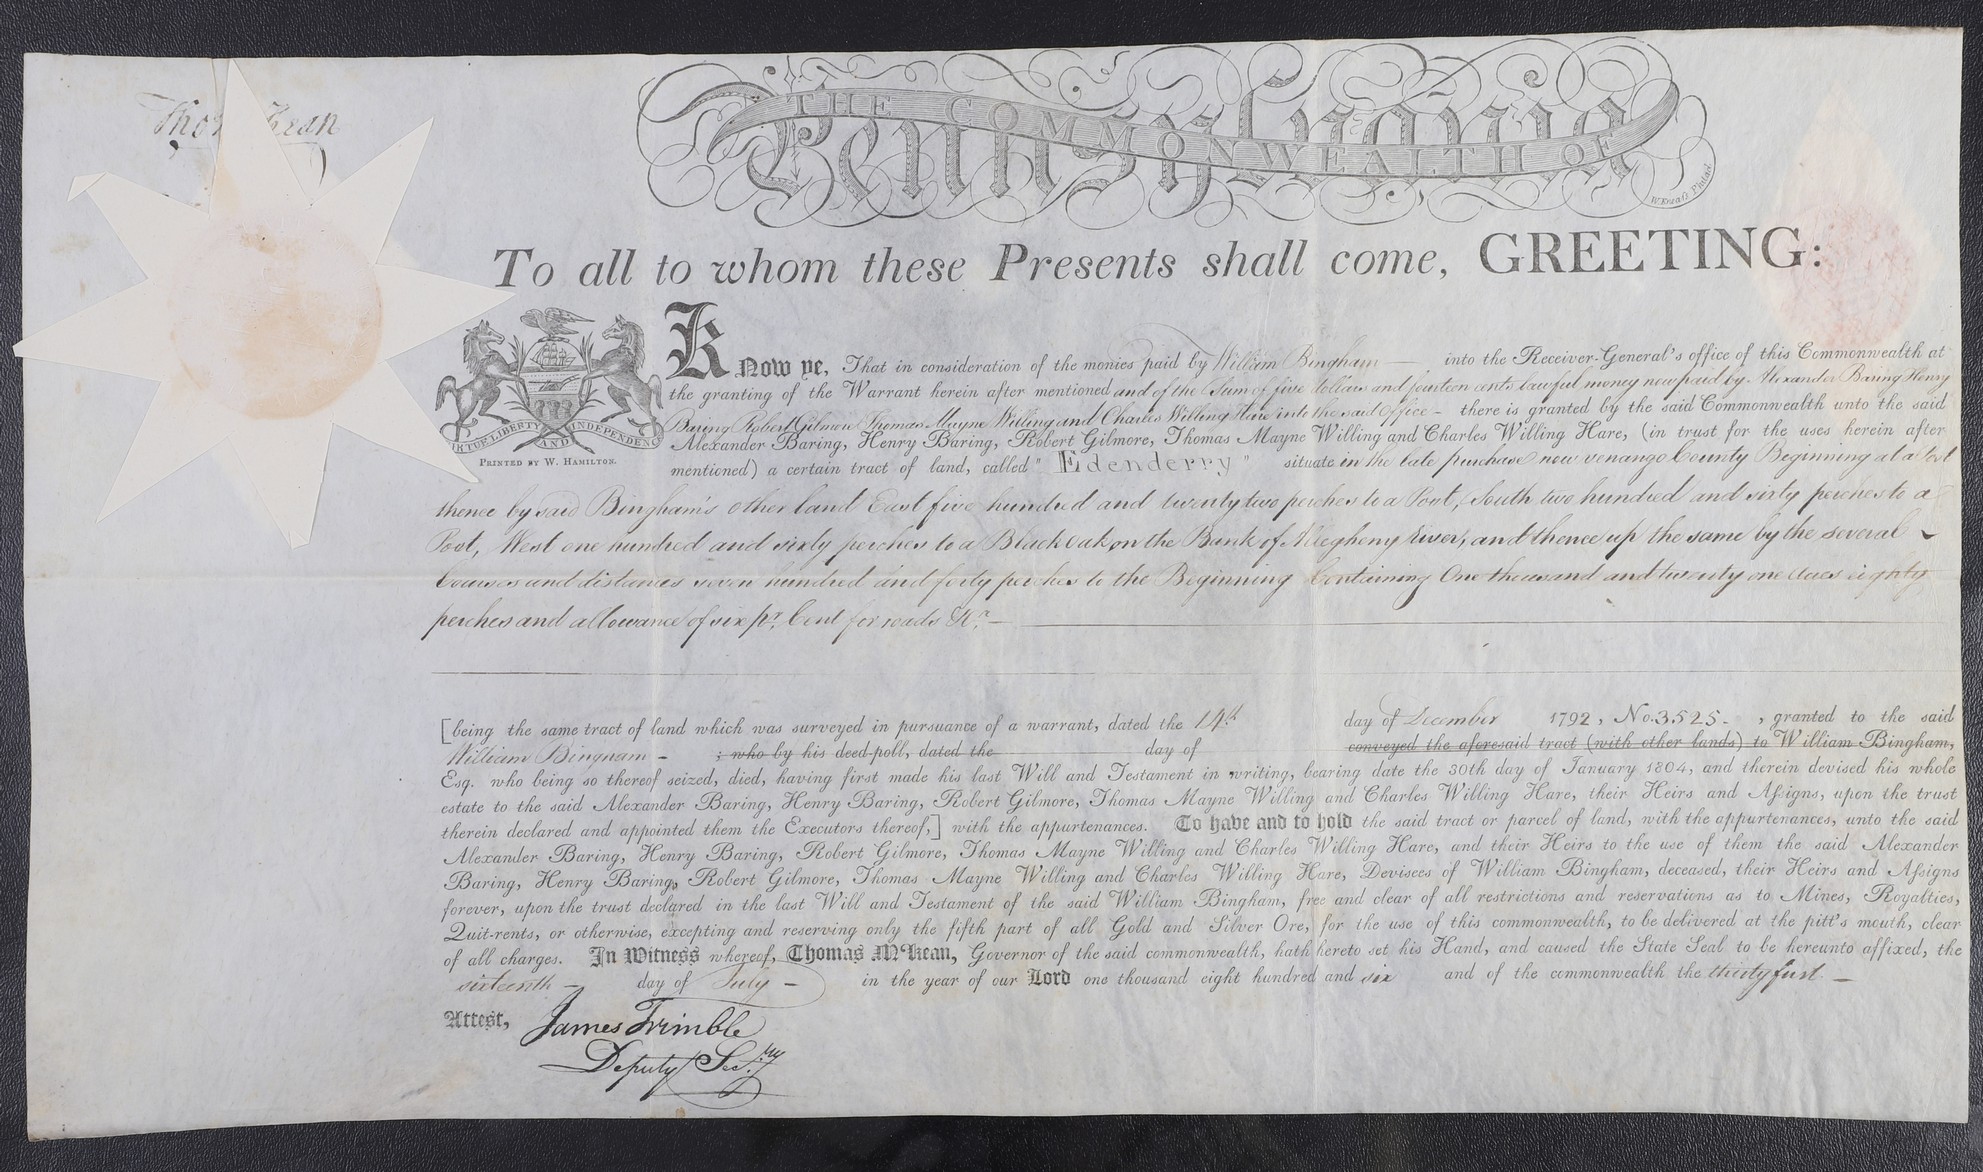 A Pennsylvania land grant on parchment 2e0eed